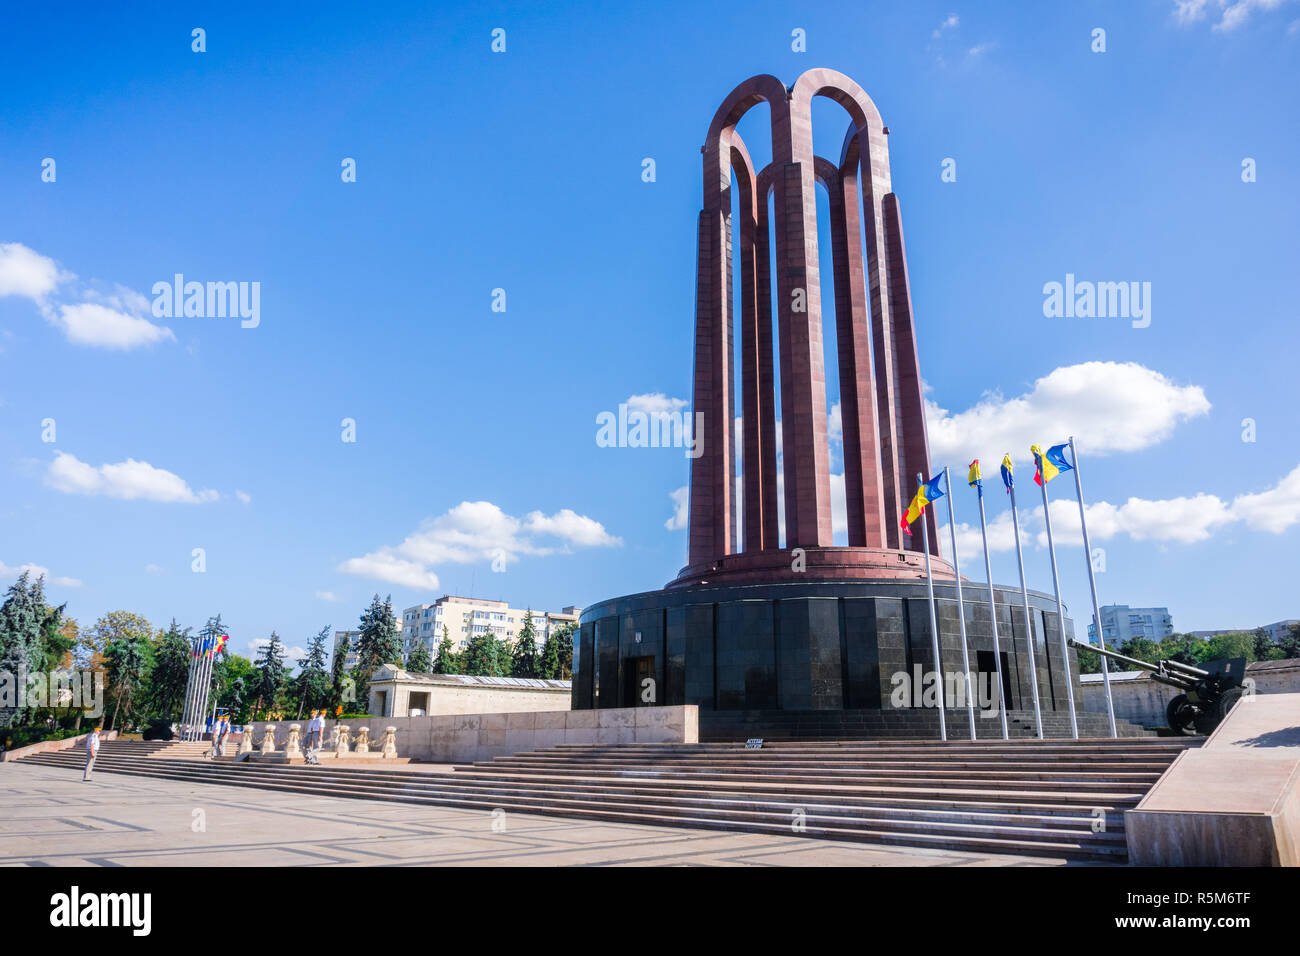 September 20, 2017 Bucharest/Romania - The unknown soldier mausoleum located in Carol Park Stock Photo